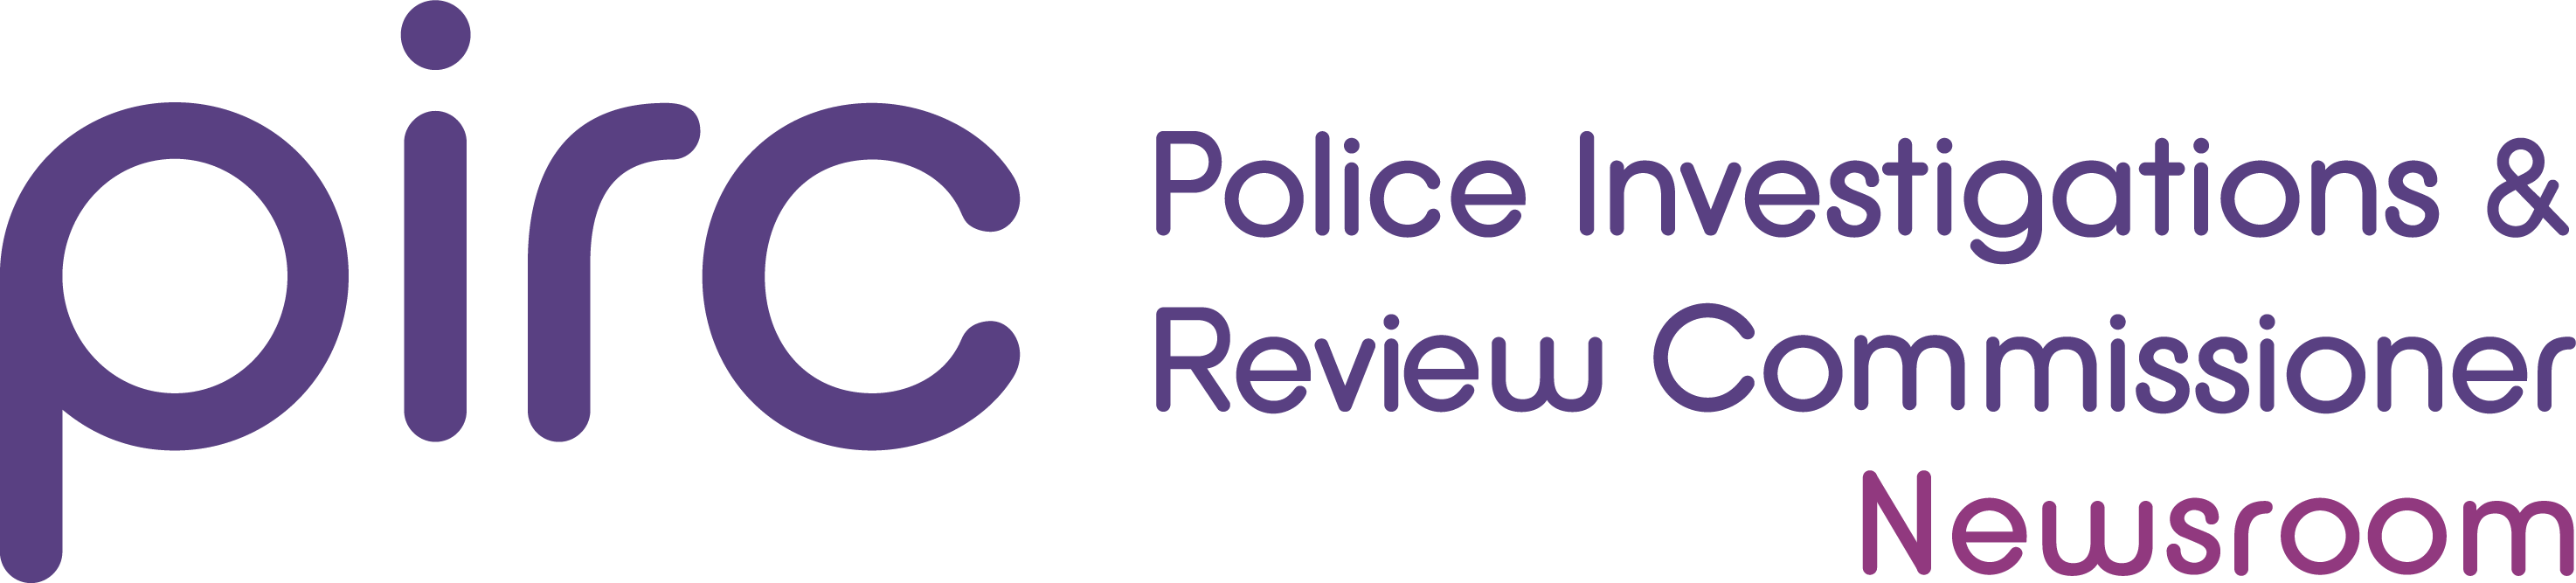 Police Investigations and Review Commissioner for Scotland